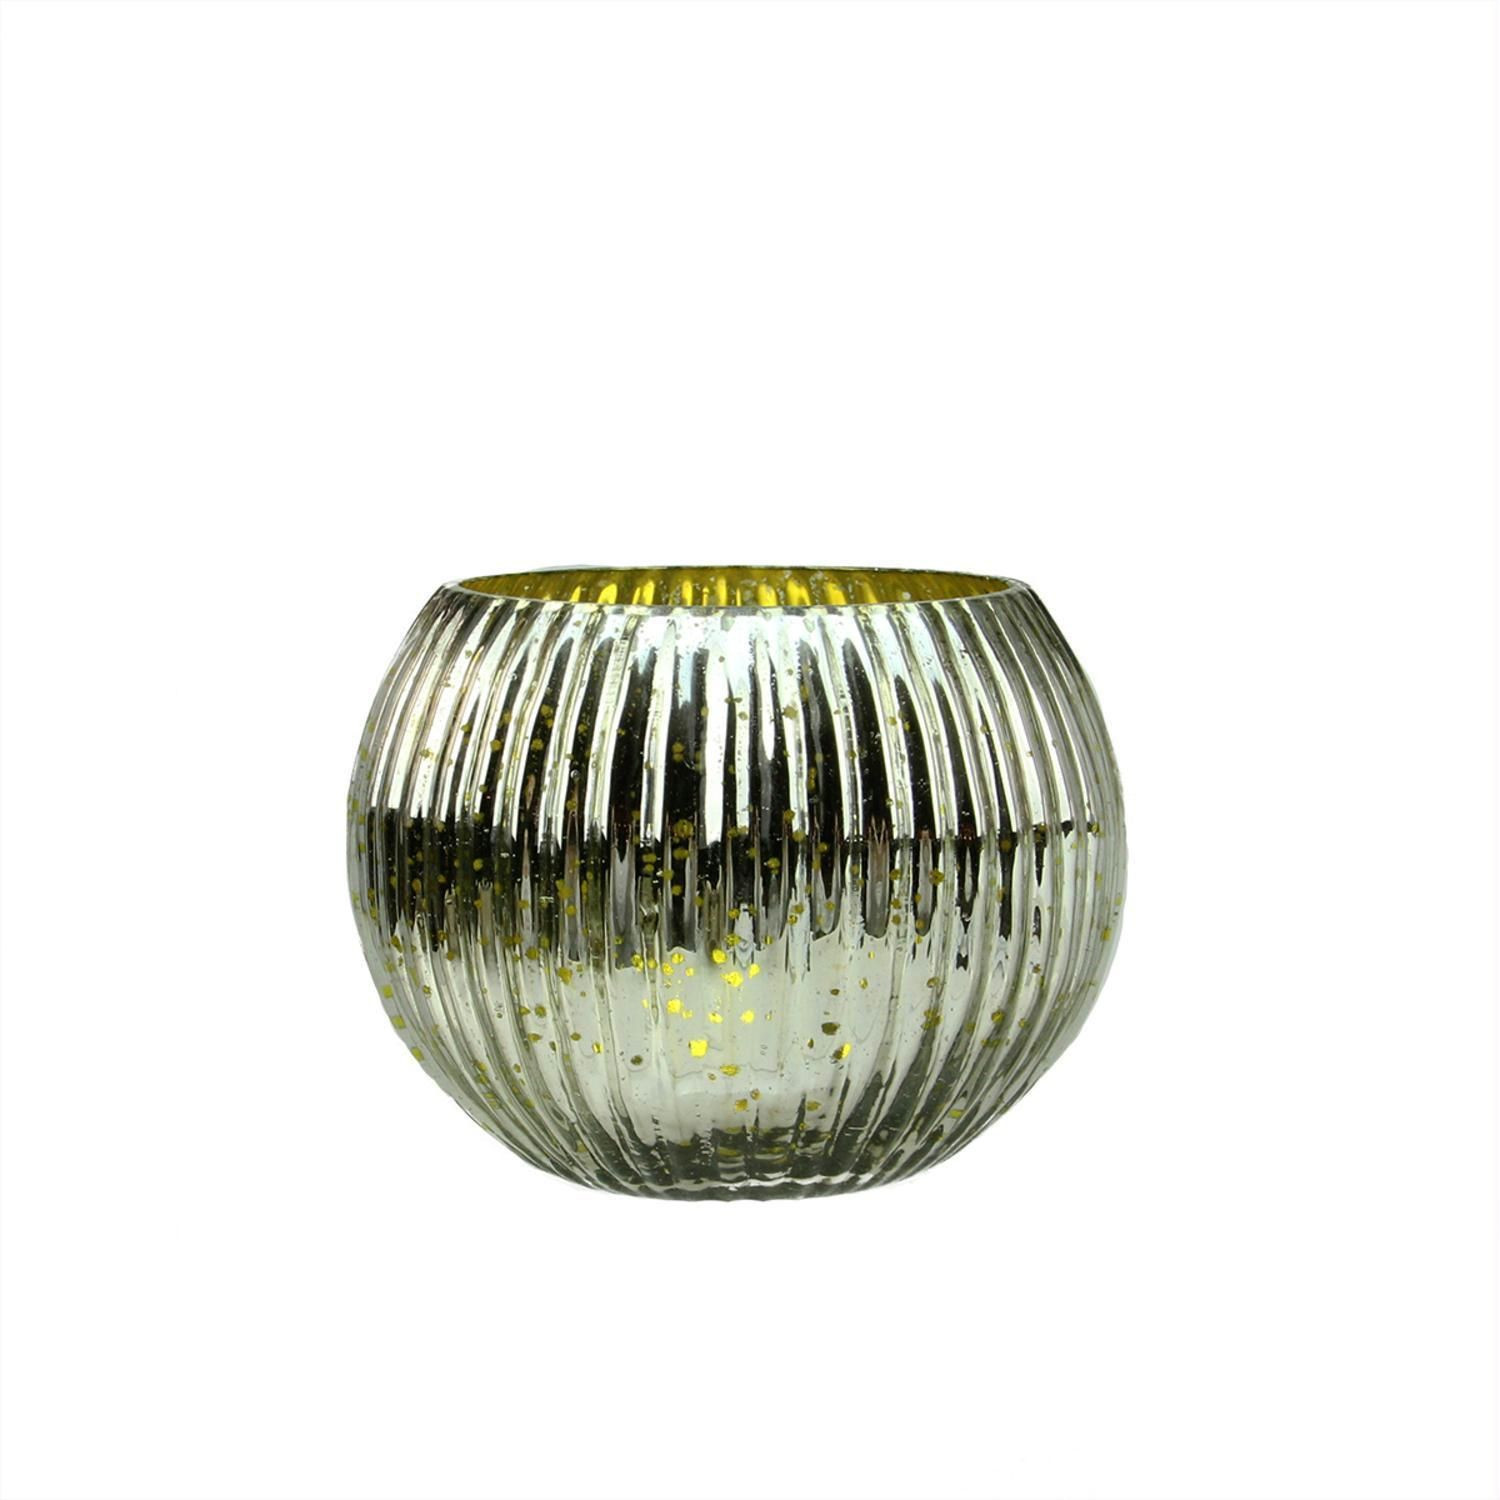 rent mercury glass vases of set of 4 lime green and silver ribbed round mercury glass decorative throughout set of 4 lime green and silver ribbed round mercury glass decorative votive candle holders 3 25